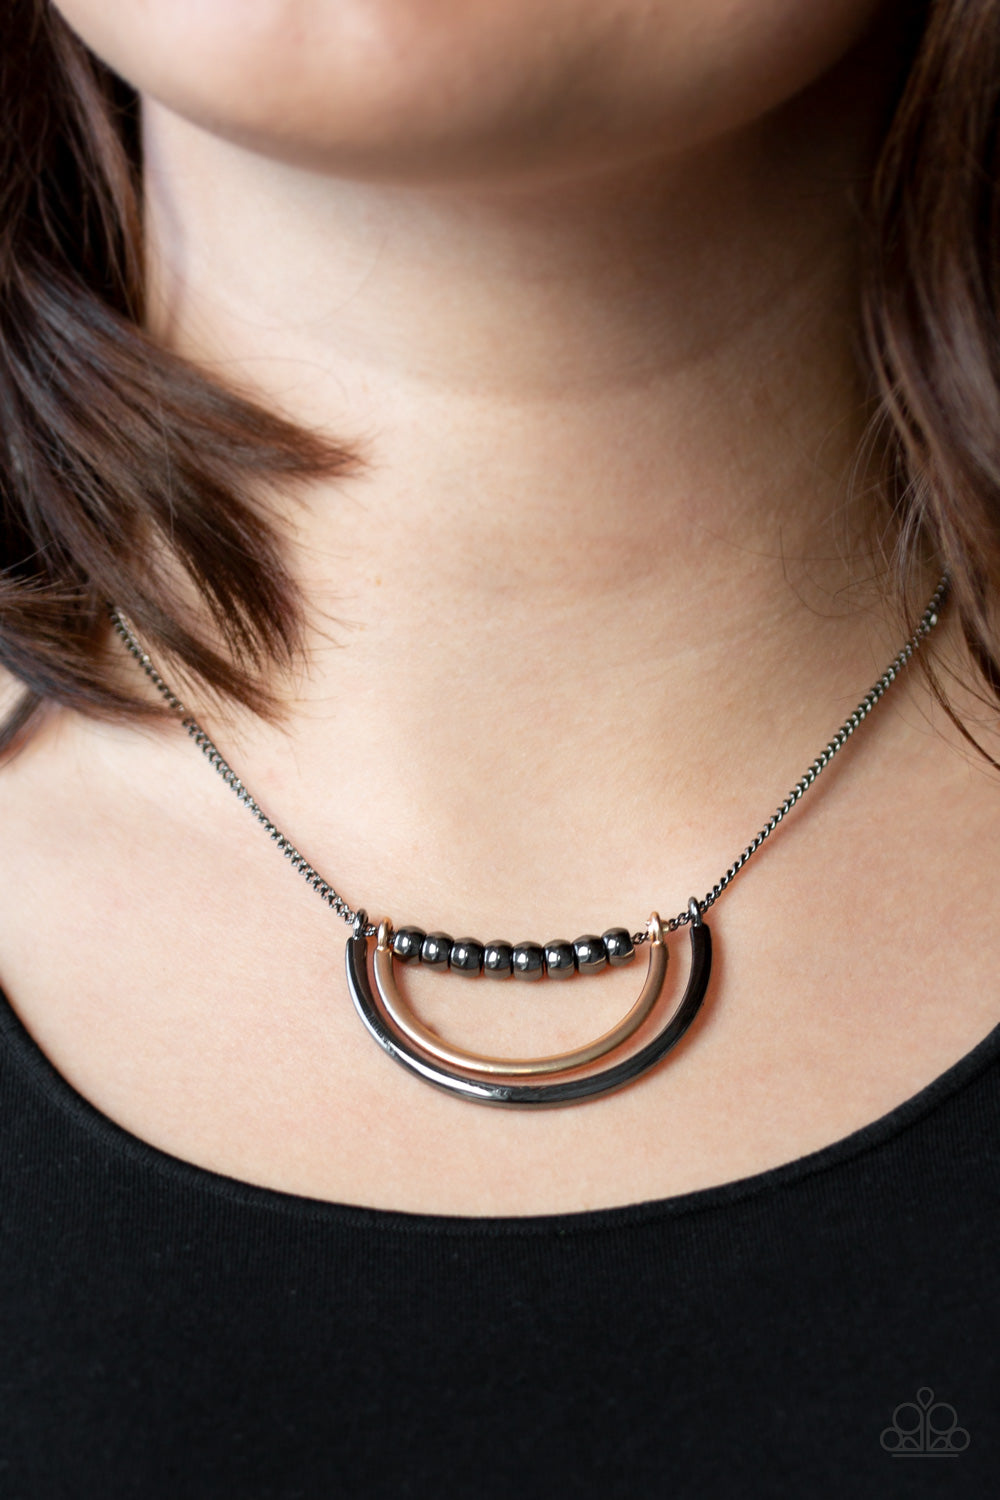 Artificial Arches- Gold and Gunmetal Necklace- Paparazzi Accessories